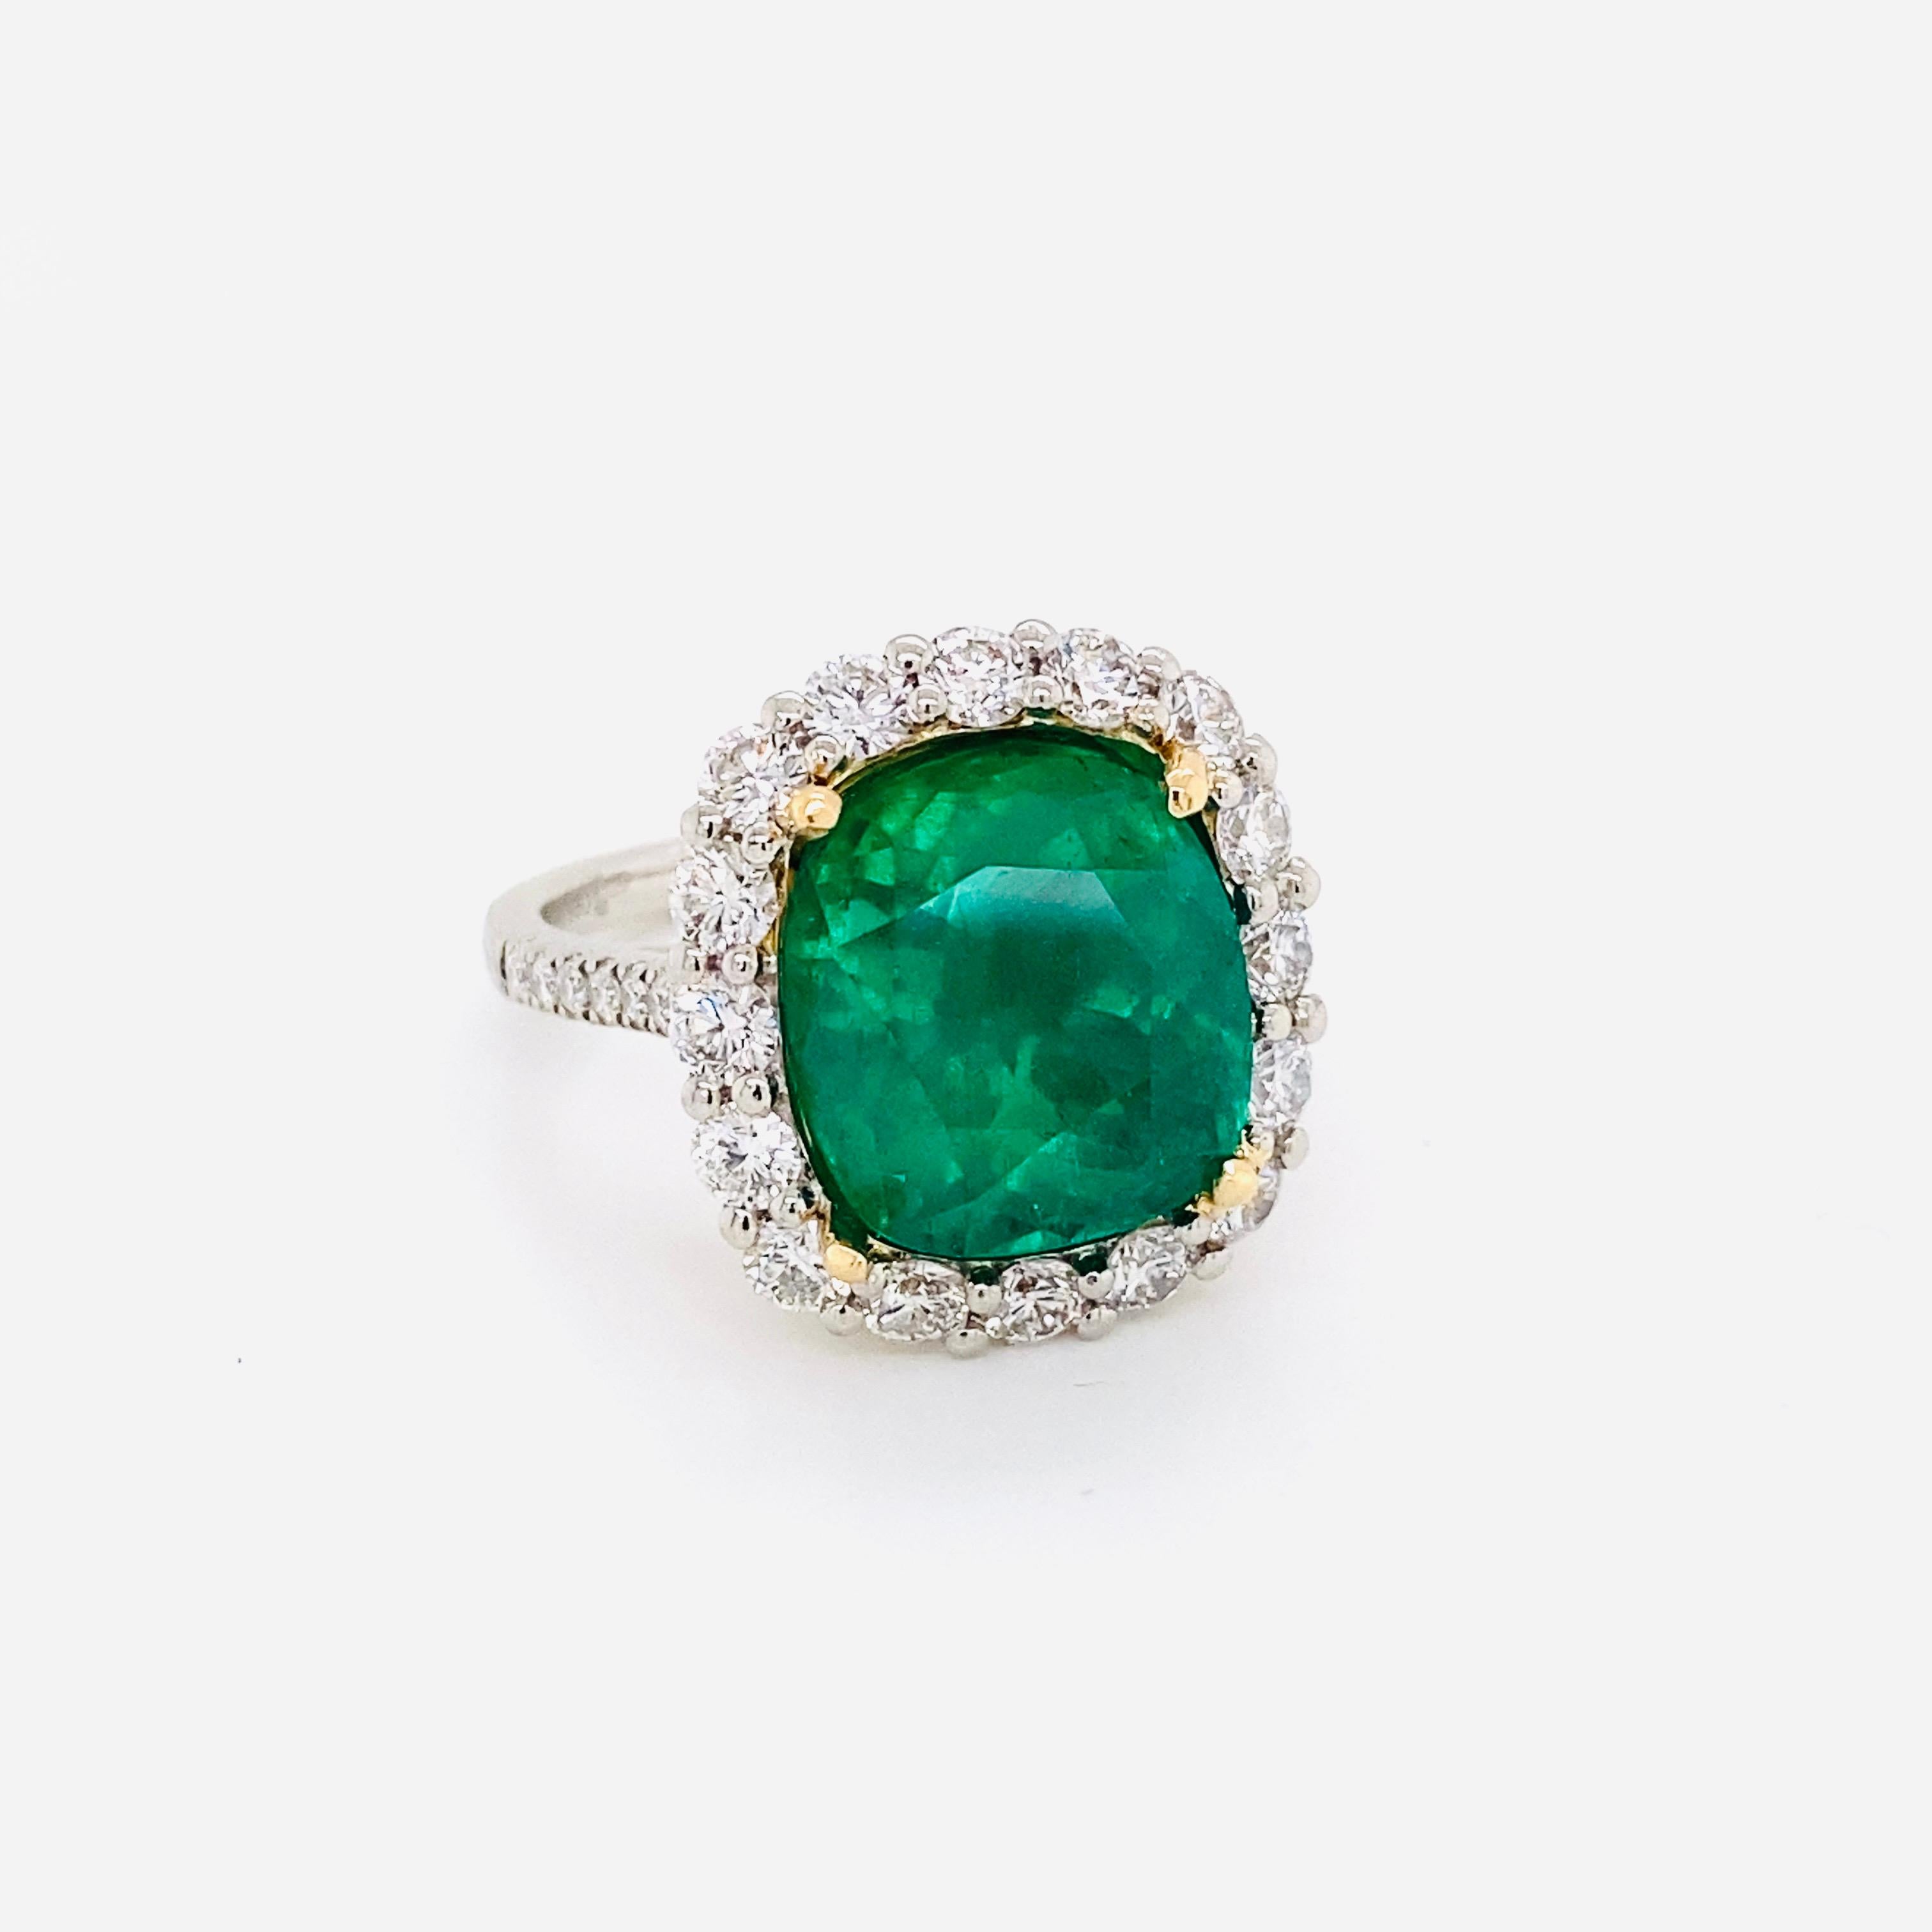 From the Emilio Jewelry  Vault, Showcasing a magnificent 7.65 carat natural Emerald certified by C.Dunaigre as a natural Colombian Emerald with minor oil treatment. The color is certified as Vivid Green the most desirable color in Emeralds. 
You